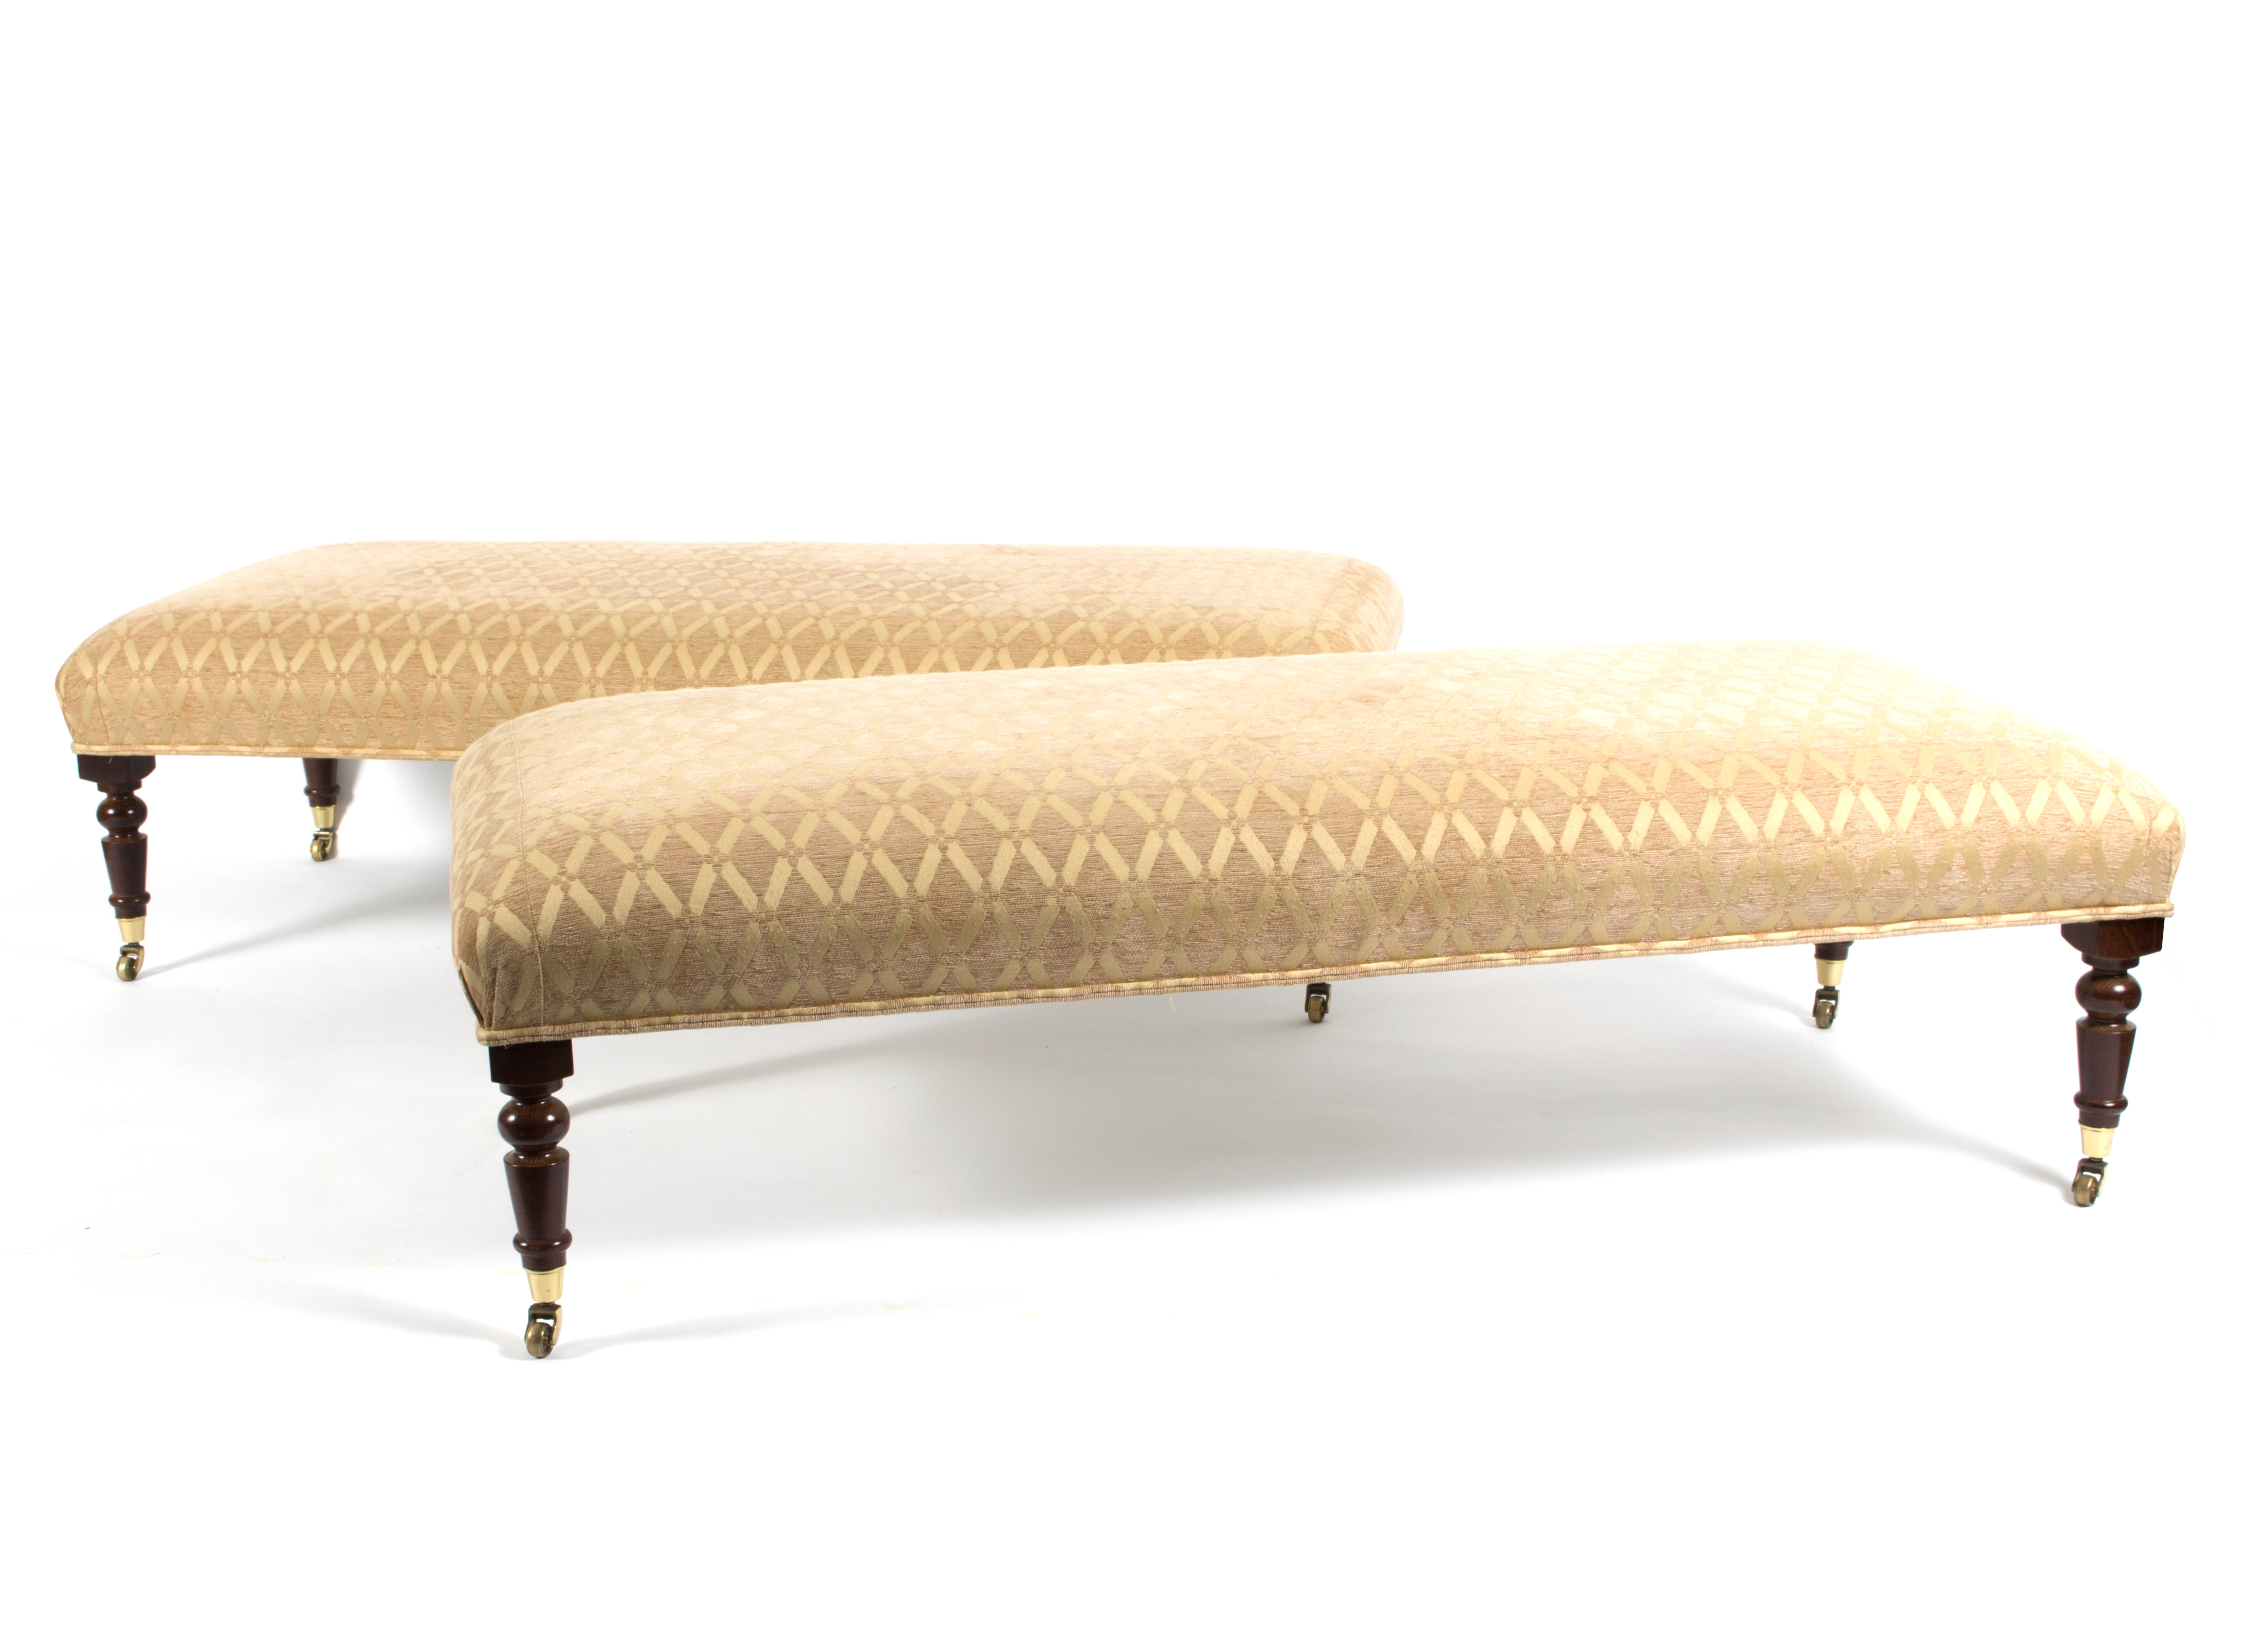 A pair of rectangular footstools with upholstered seats on turned legs,